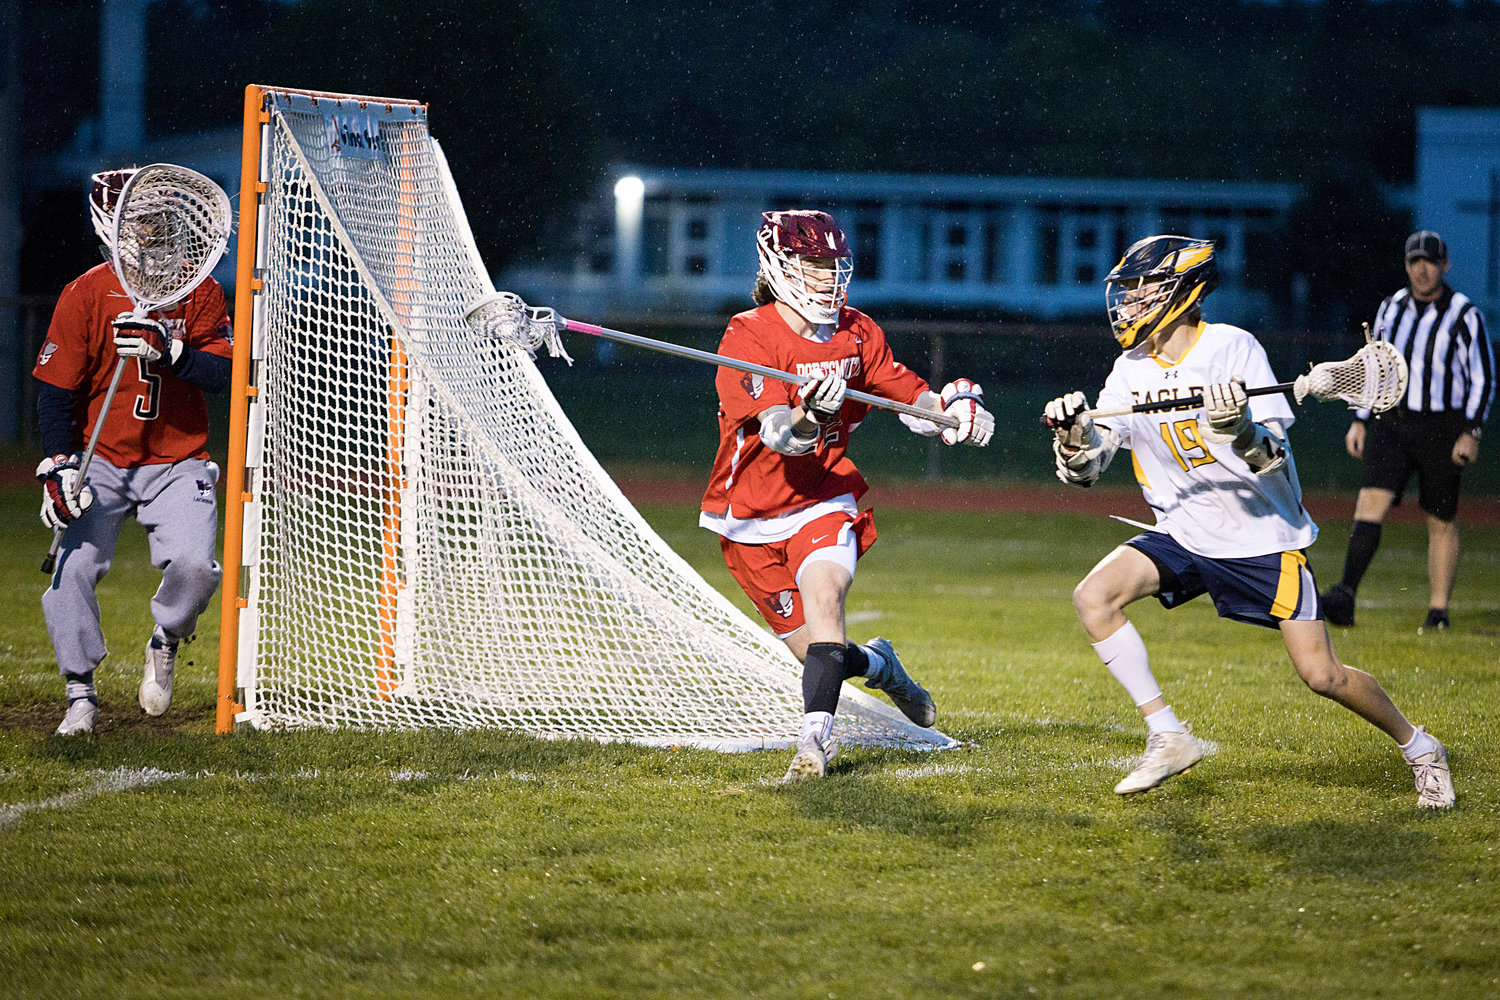 Joe Rocco prevents a Barrington opponent from turning toward the goal.